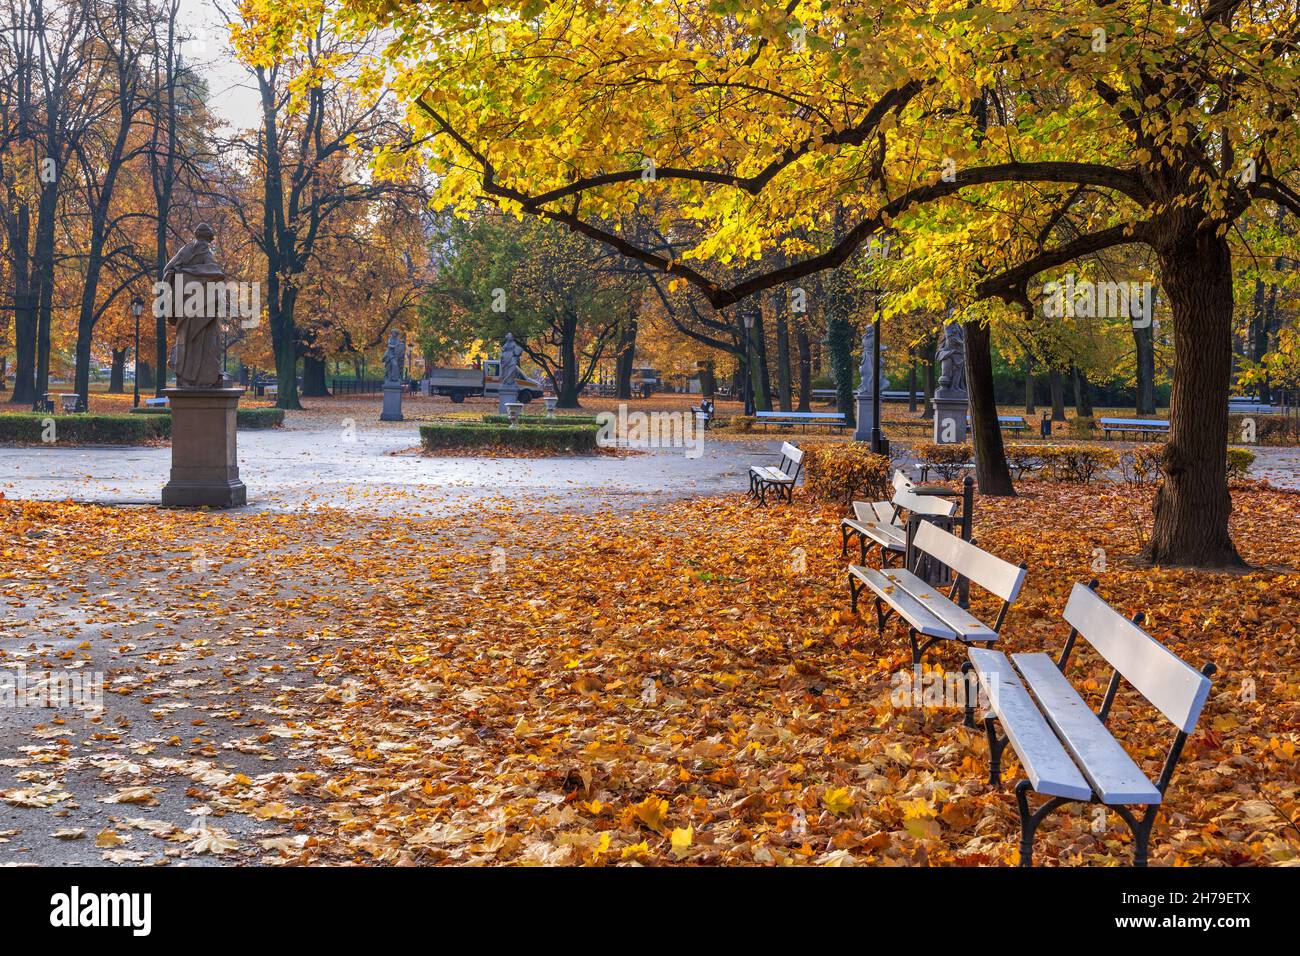 The Saxon Garden (Ogrod Saski) in Warsaw, Poland. Autumn scenery with alleys, fallen leaves and benches, public park in the city center. Stock Photo